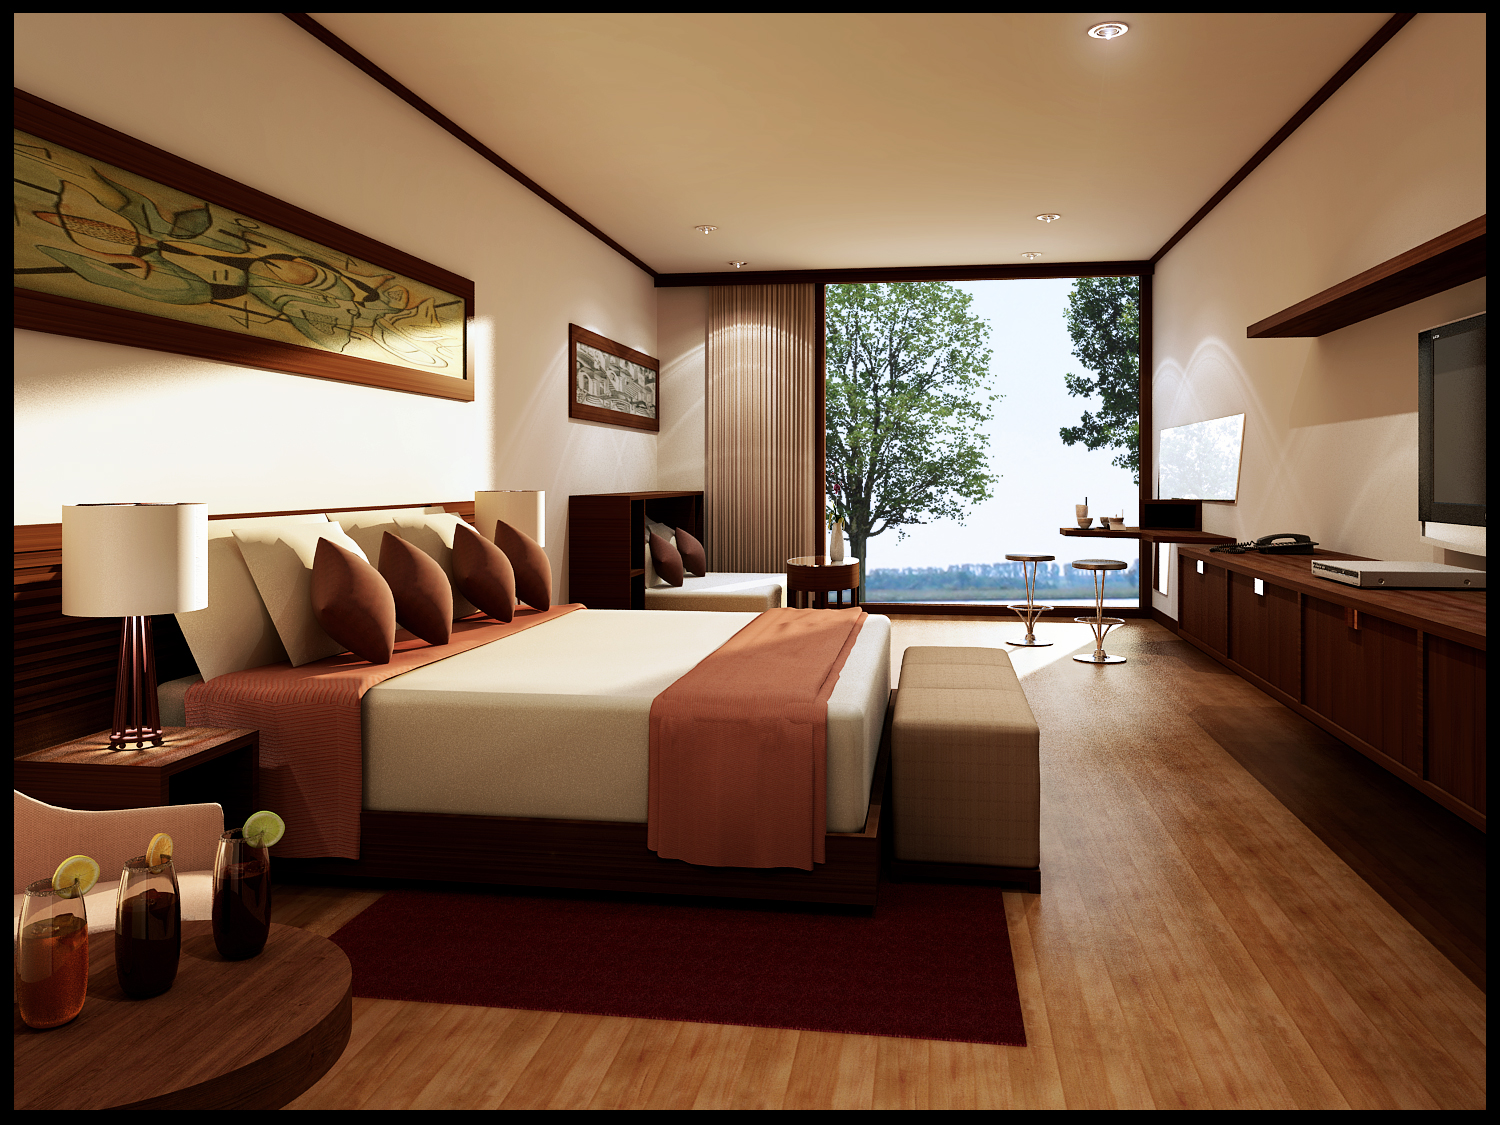 http://www.everythingsimple.com/wp-content/uploads/2011/01/Bedroom__Carribean_by_Danur78.jpg